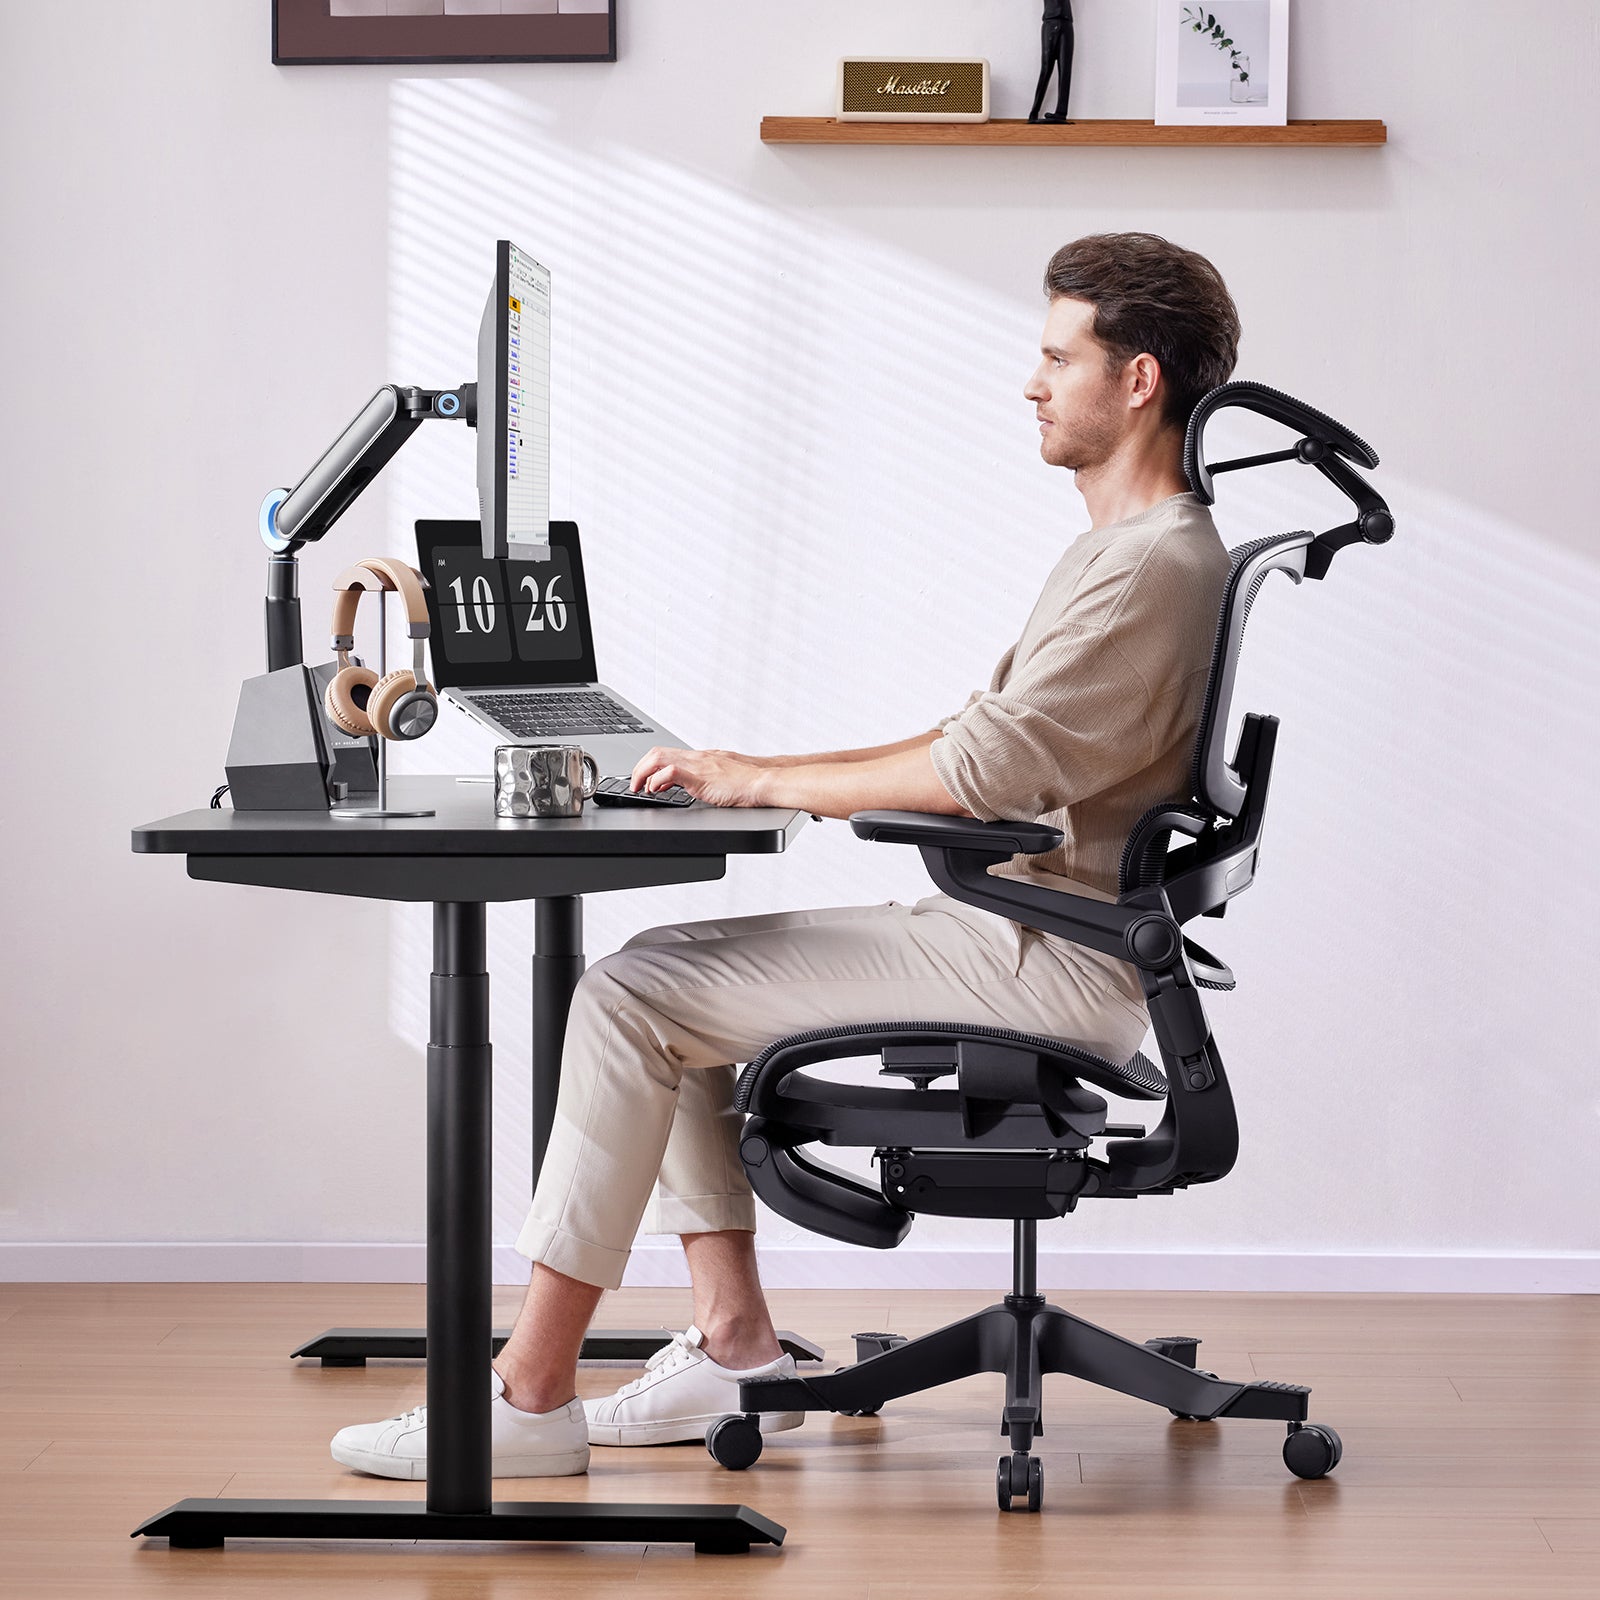 Hinomi H1 Pro Office Chair - with folding feature? : r/ErgonomicOfficeChairs